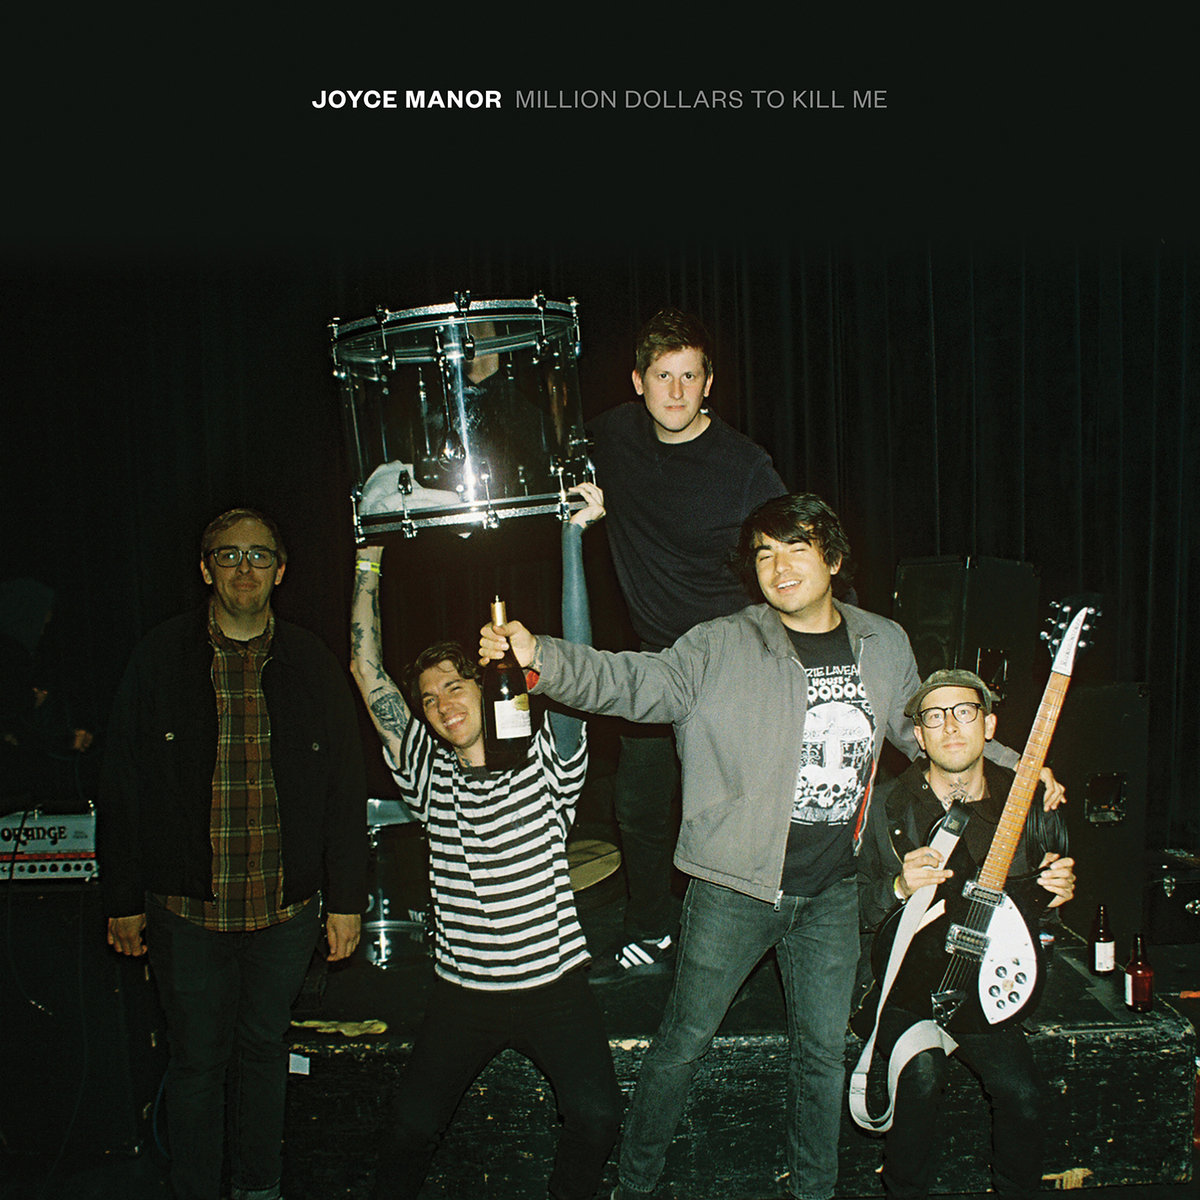 The band members, one holding up a drum, and their gear on a black background.